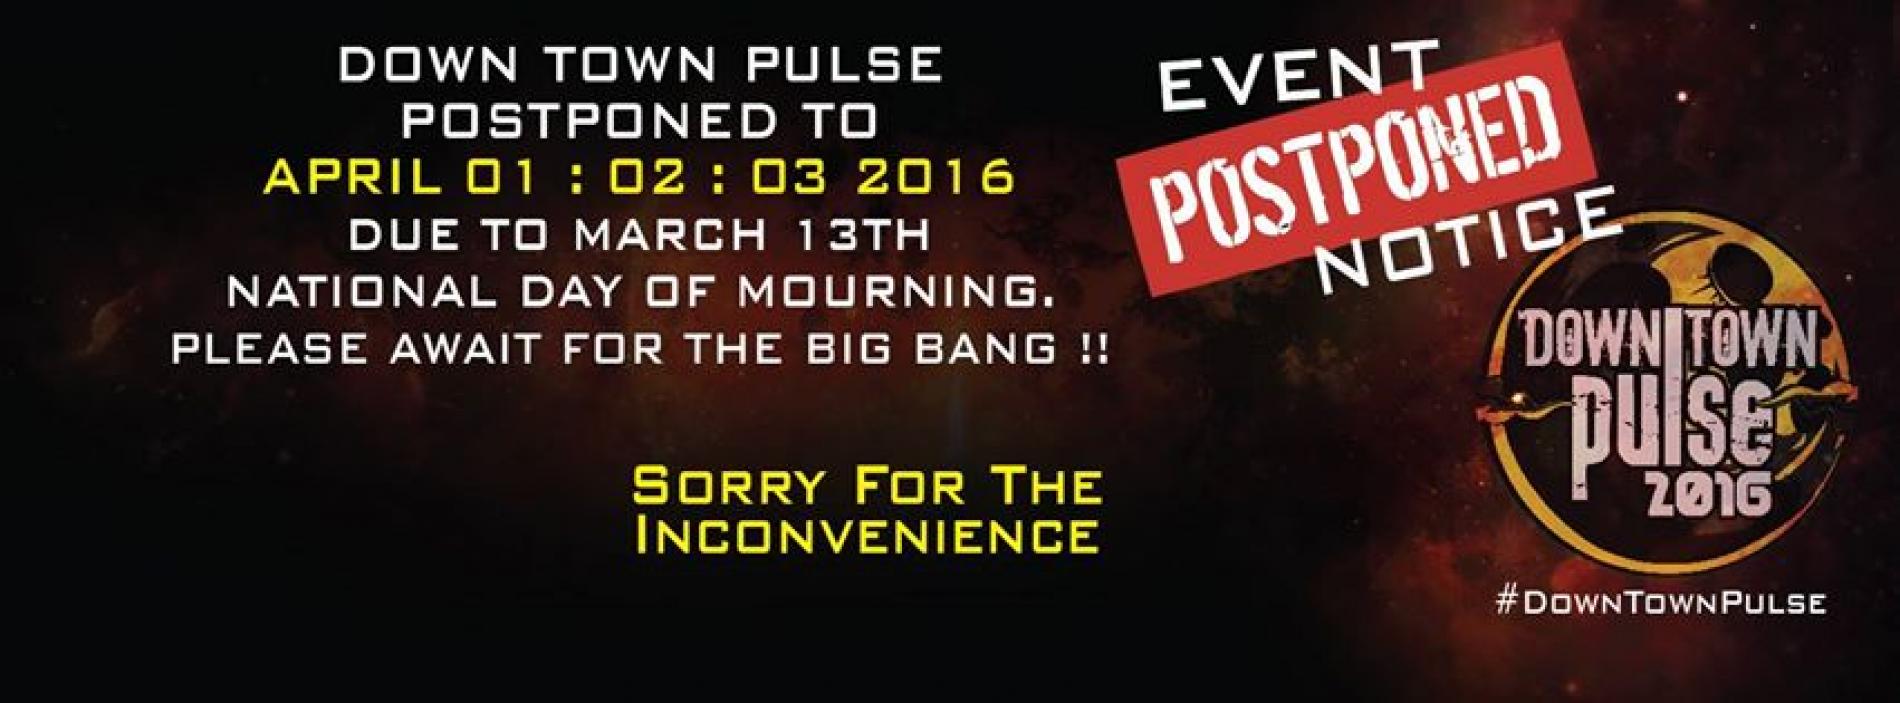 Down Town Pulse Is Postponed, What Does This Mean?